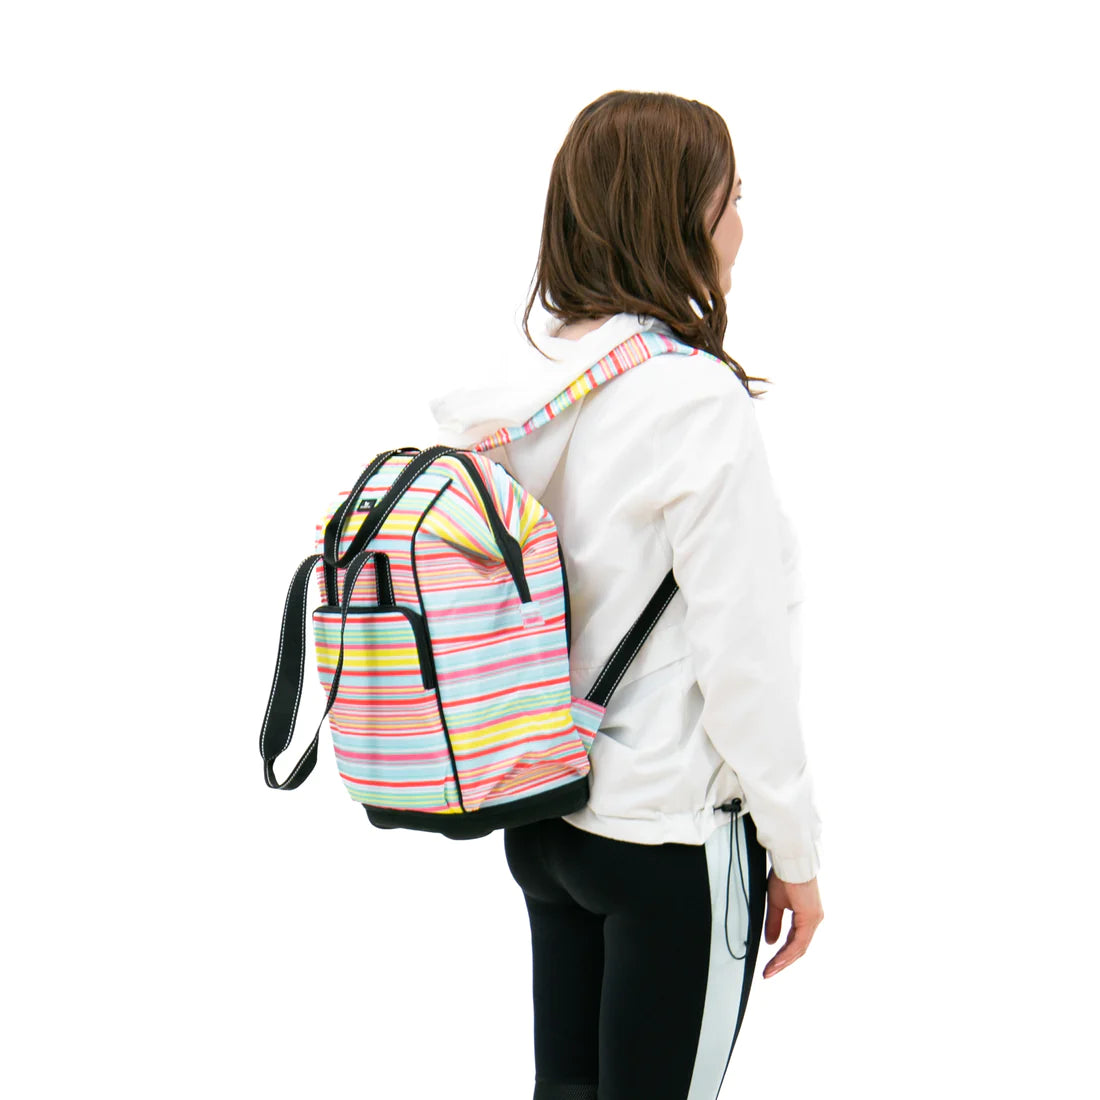 Scout Play It Cool Backpack Cooler Bag - Ripe Stripe